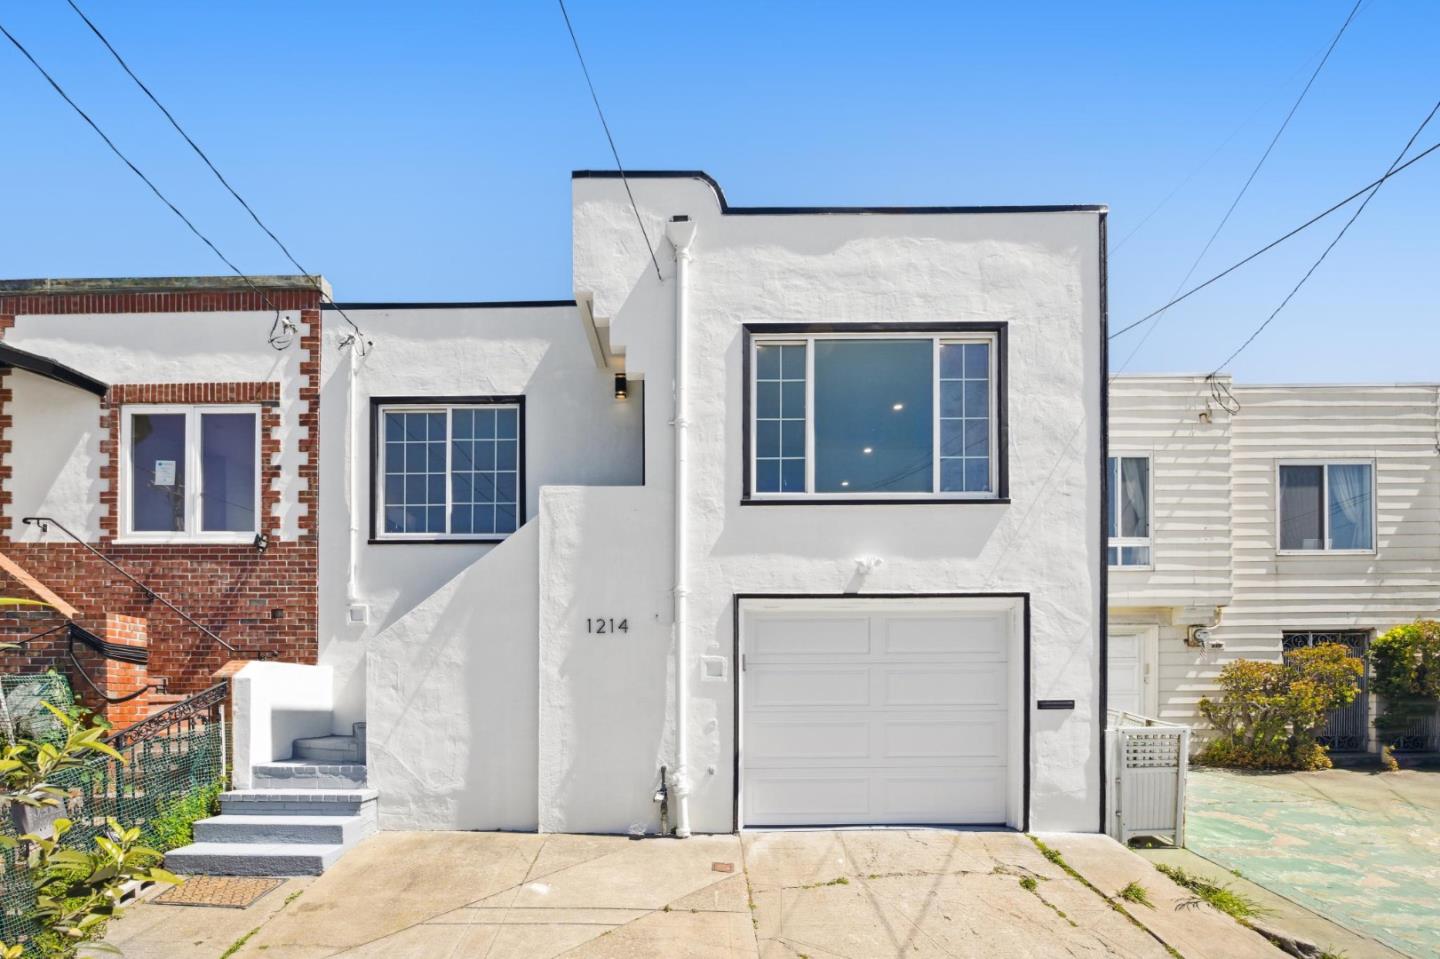 Photo of 1214 48th Ave in San Francisco, CA